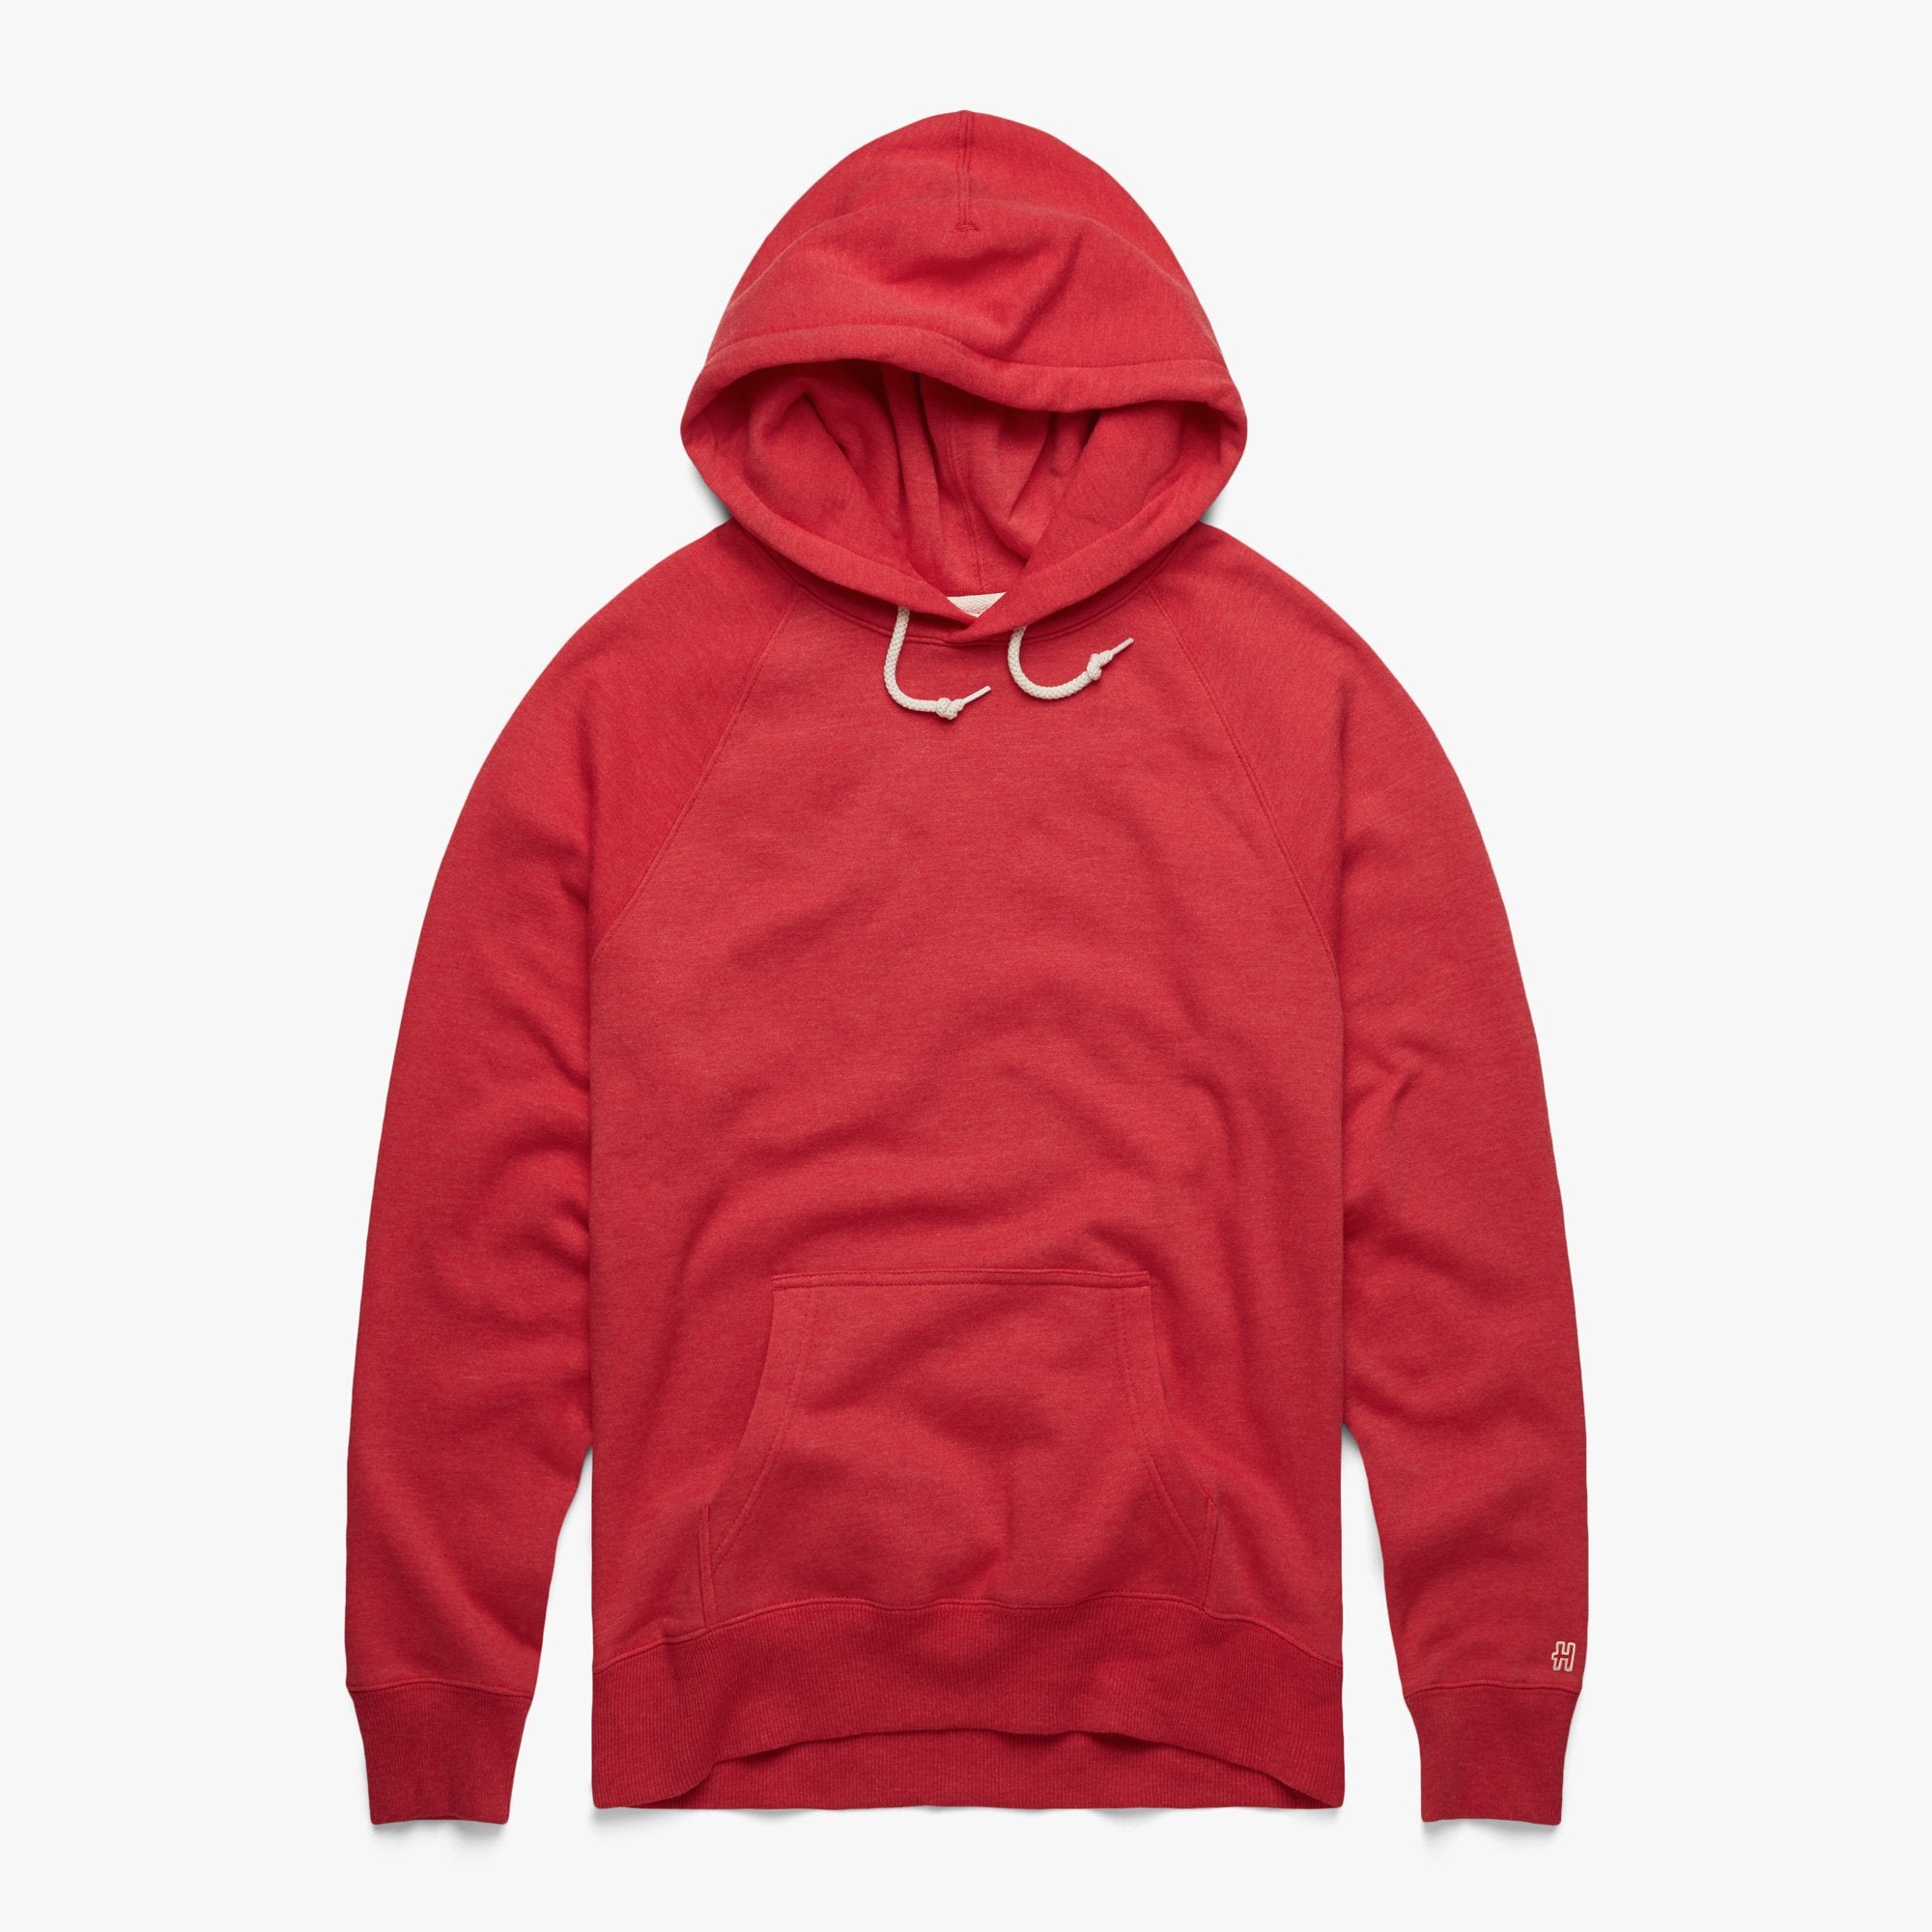 Outerstuff Youth Red St. Louis Cardinals Headliner Performance Pullover Hoodie